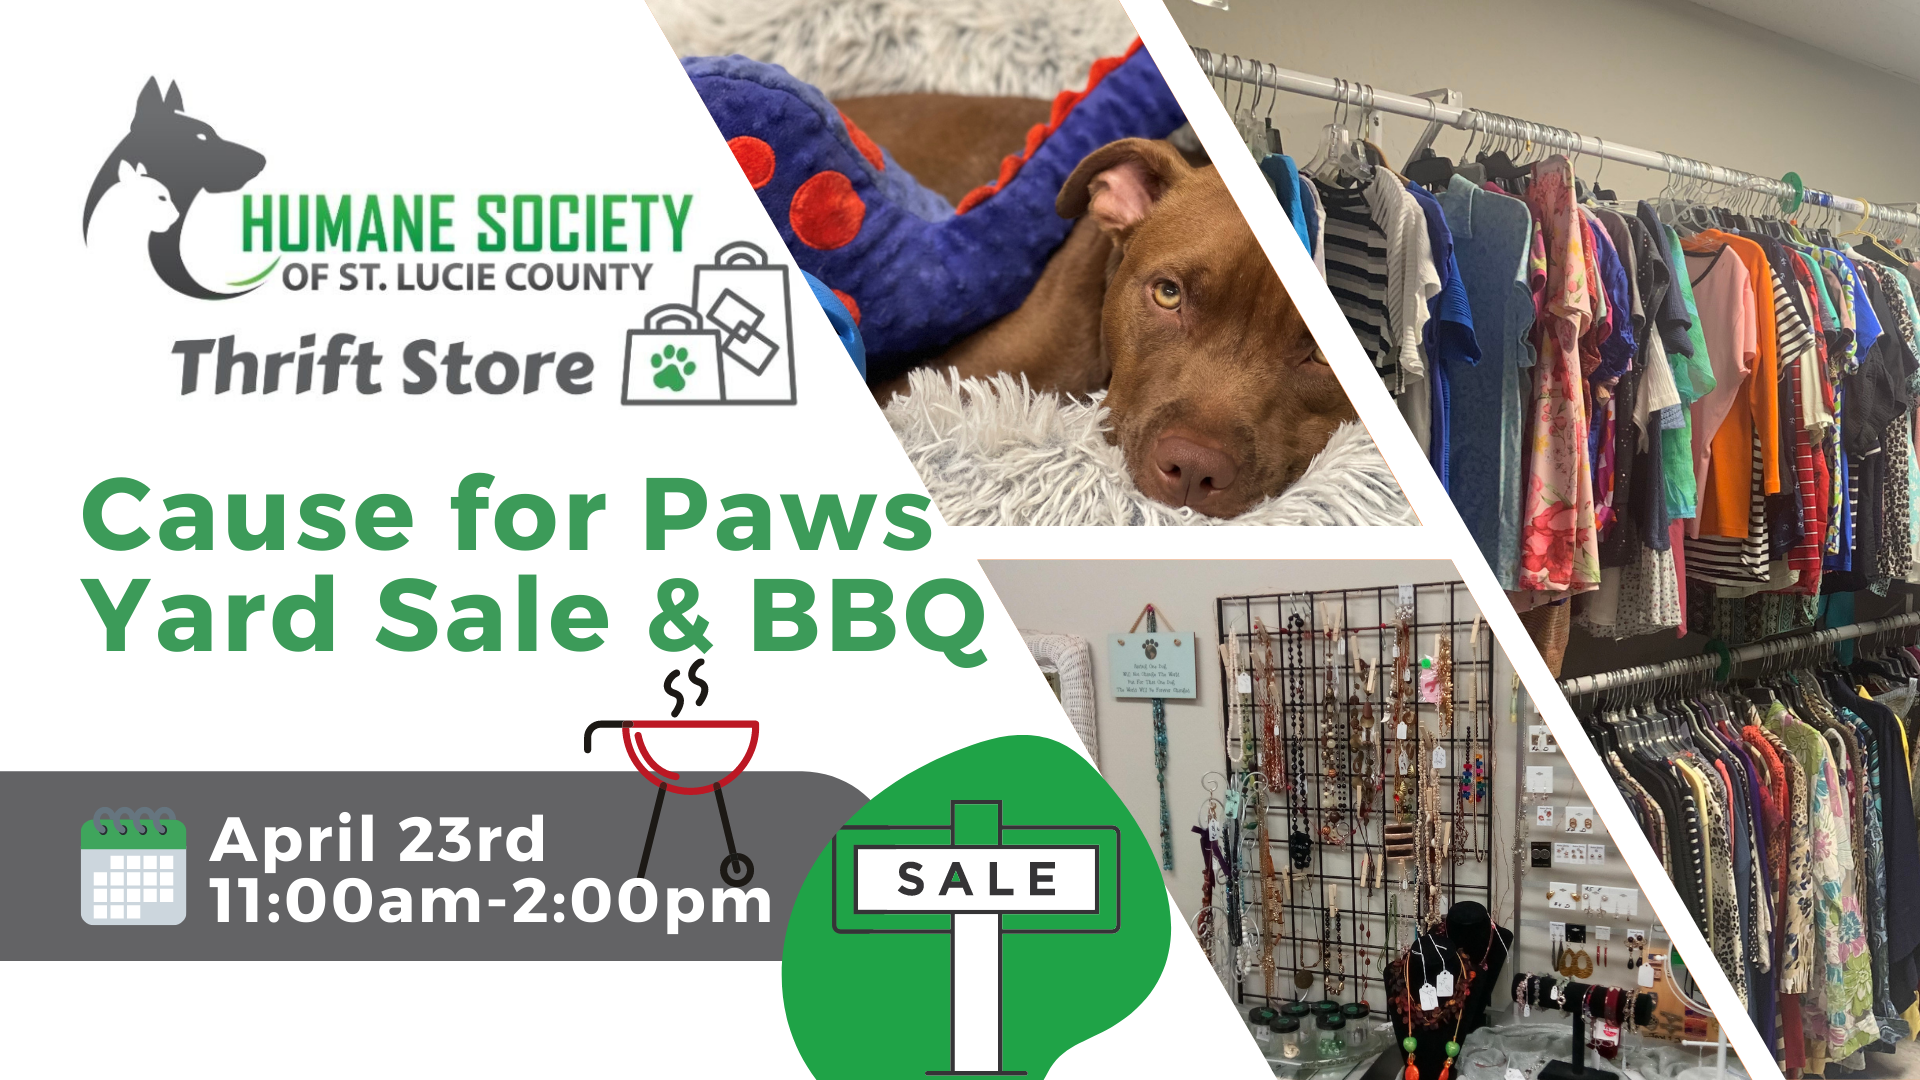 Cause for Paws Yard Sale & BBQ at the Humane Society of St. Lucie County Thrift Store